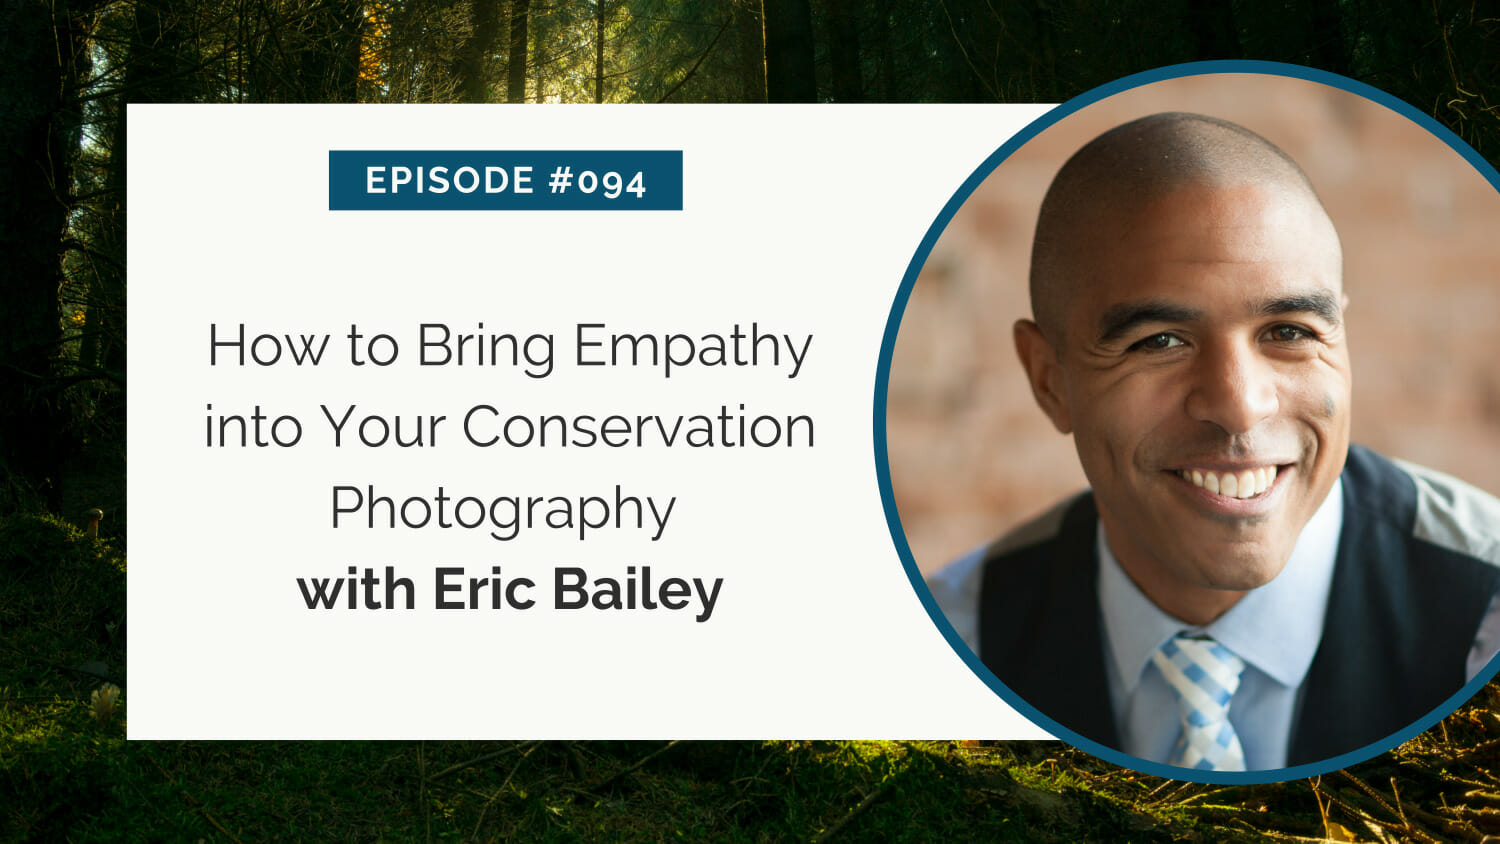 A smiling man featured next to text about a podcast episode on empathy in conservation photography.